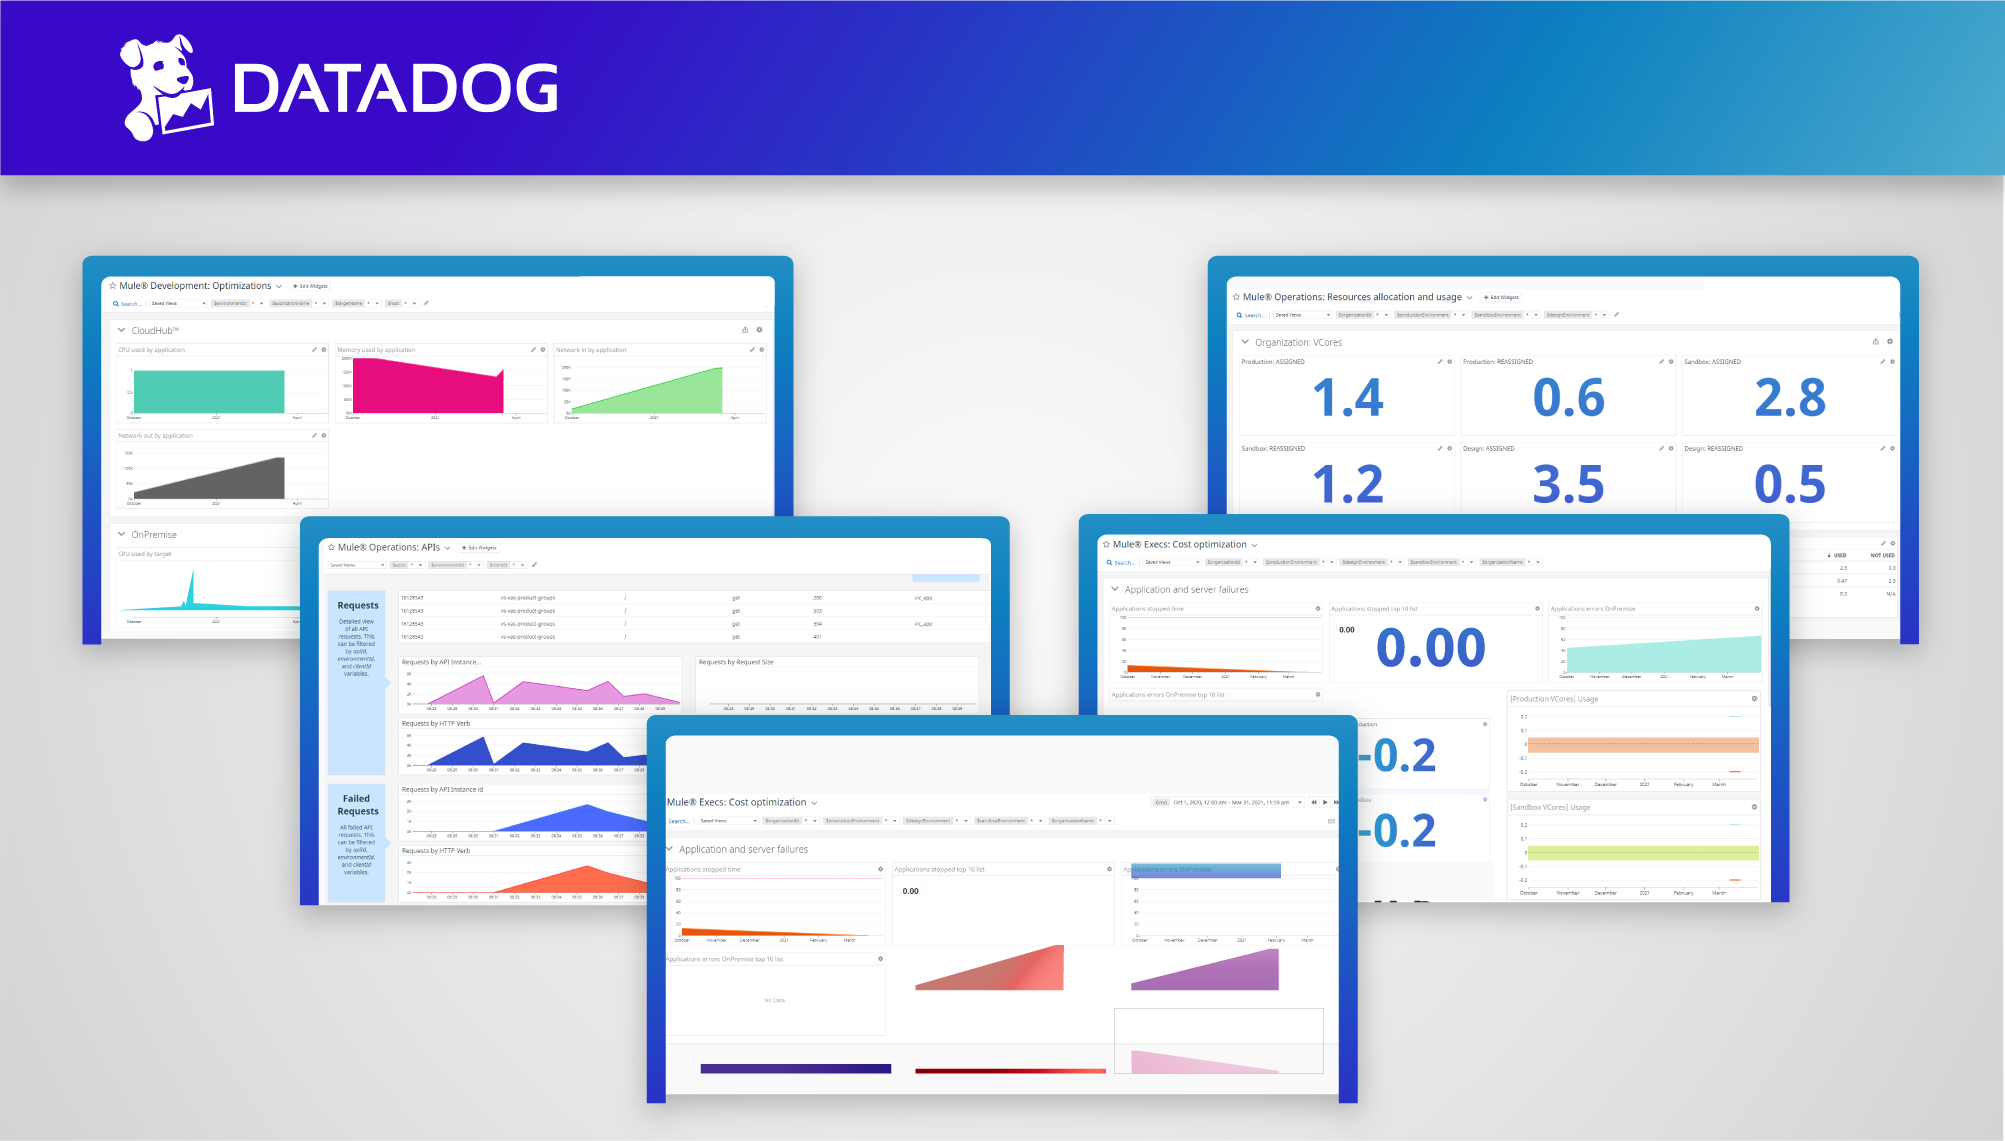 The Datadog Mule Integration dashboards monitor Mule applications with Datadog.